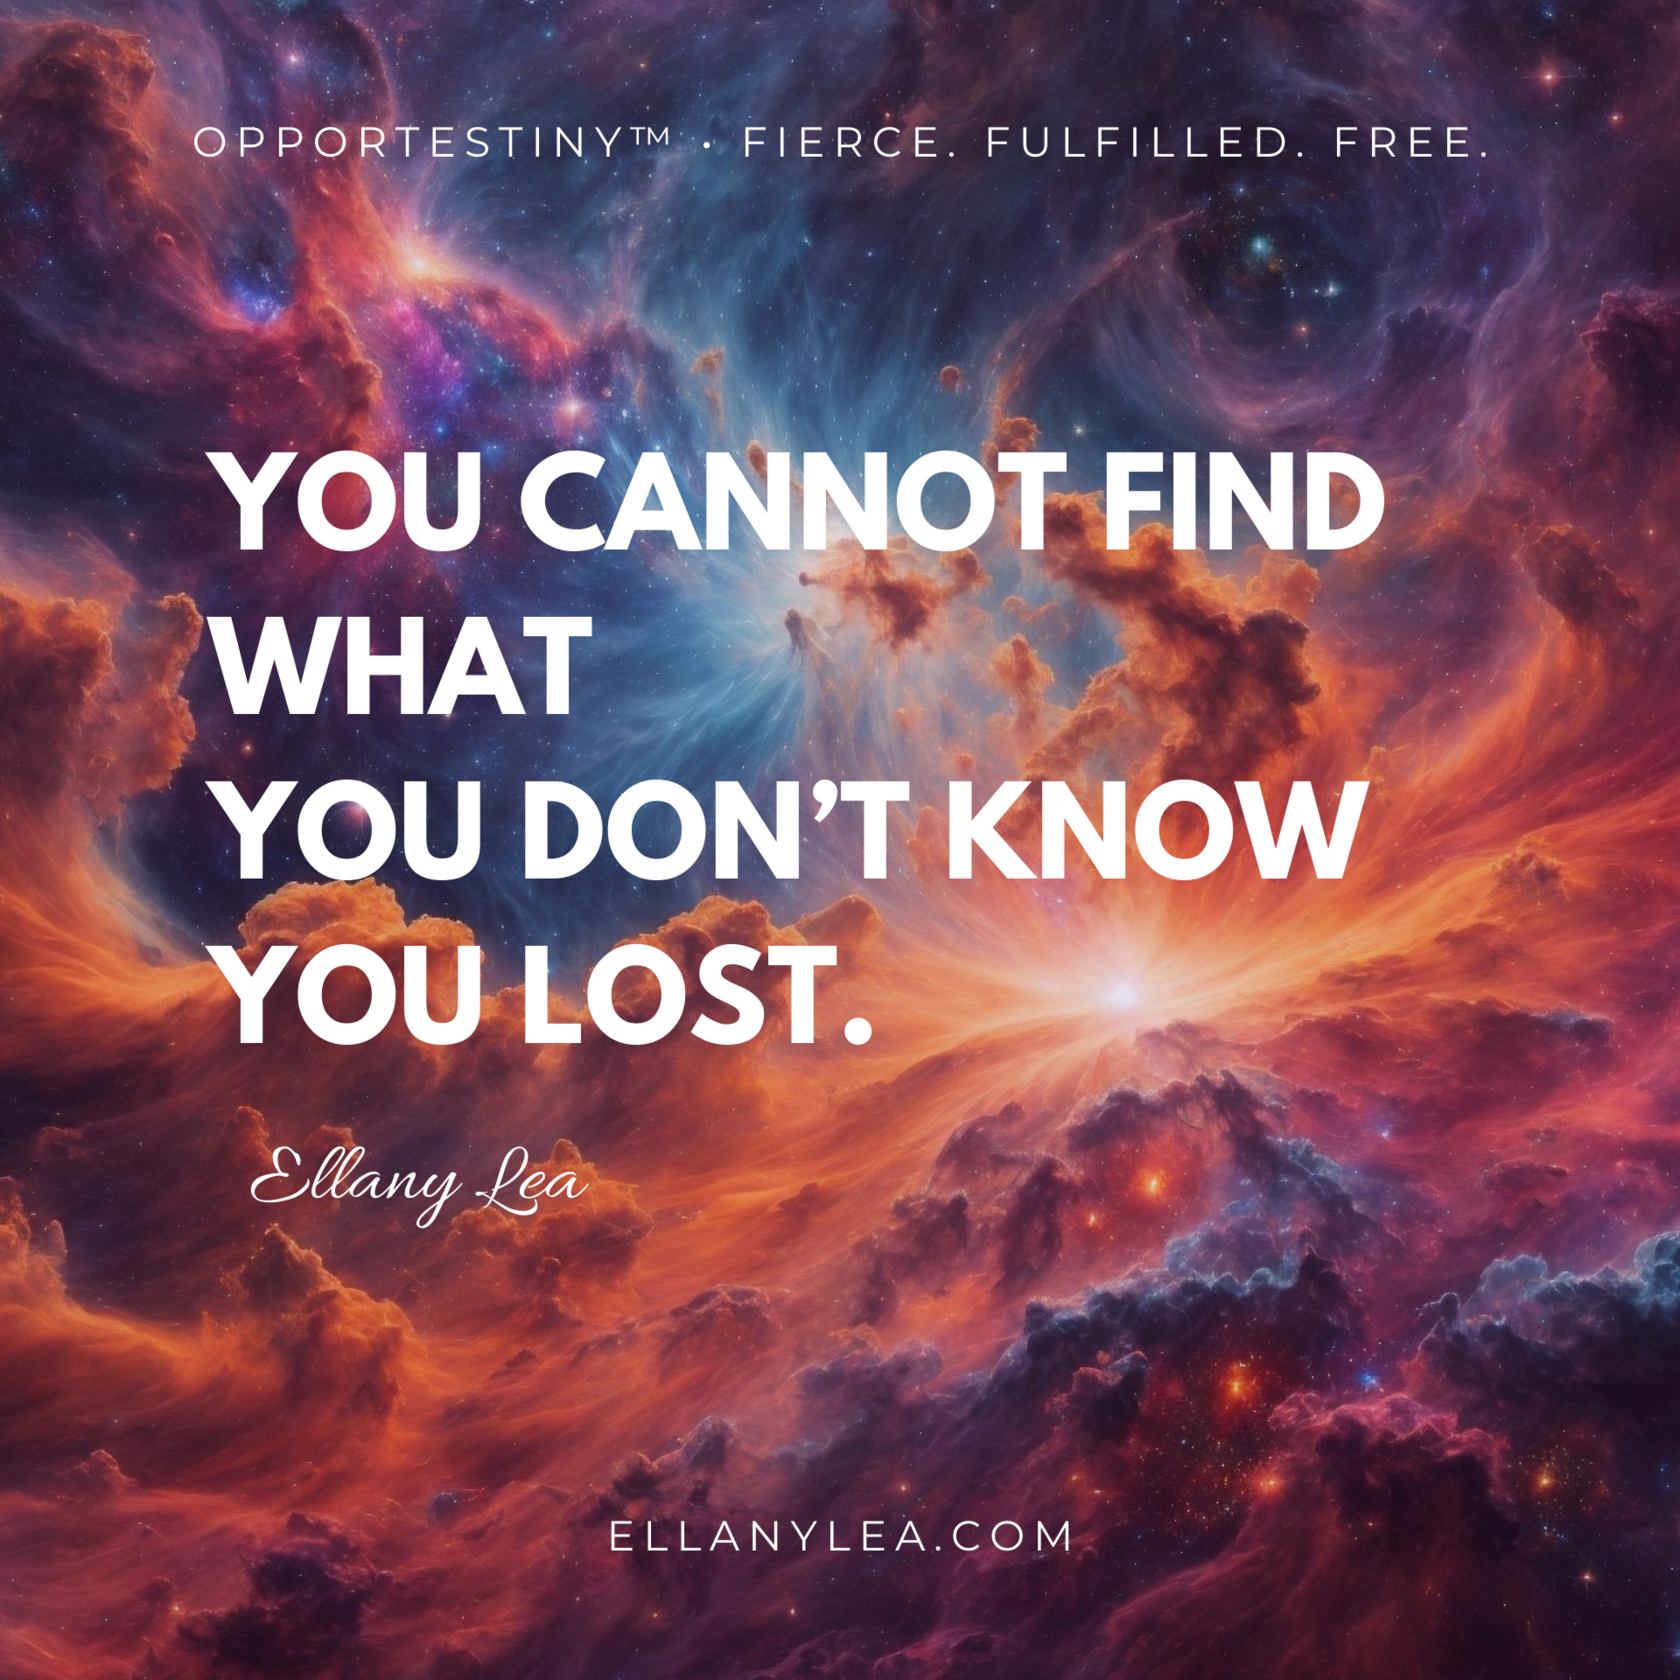 quote - cannot find lost